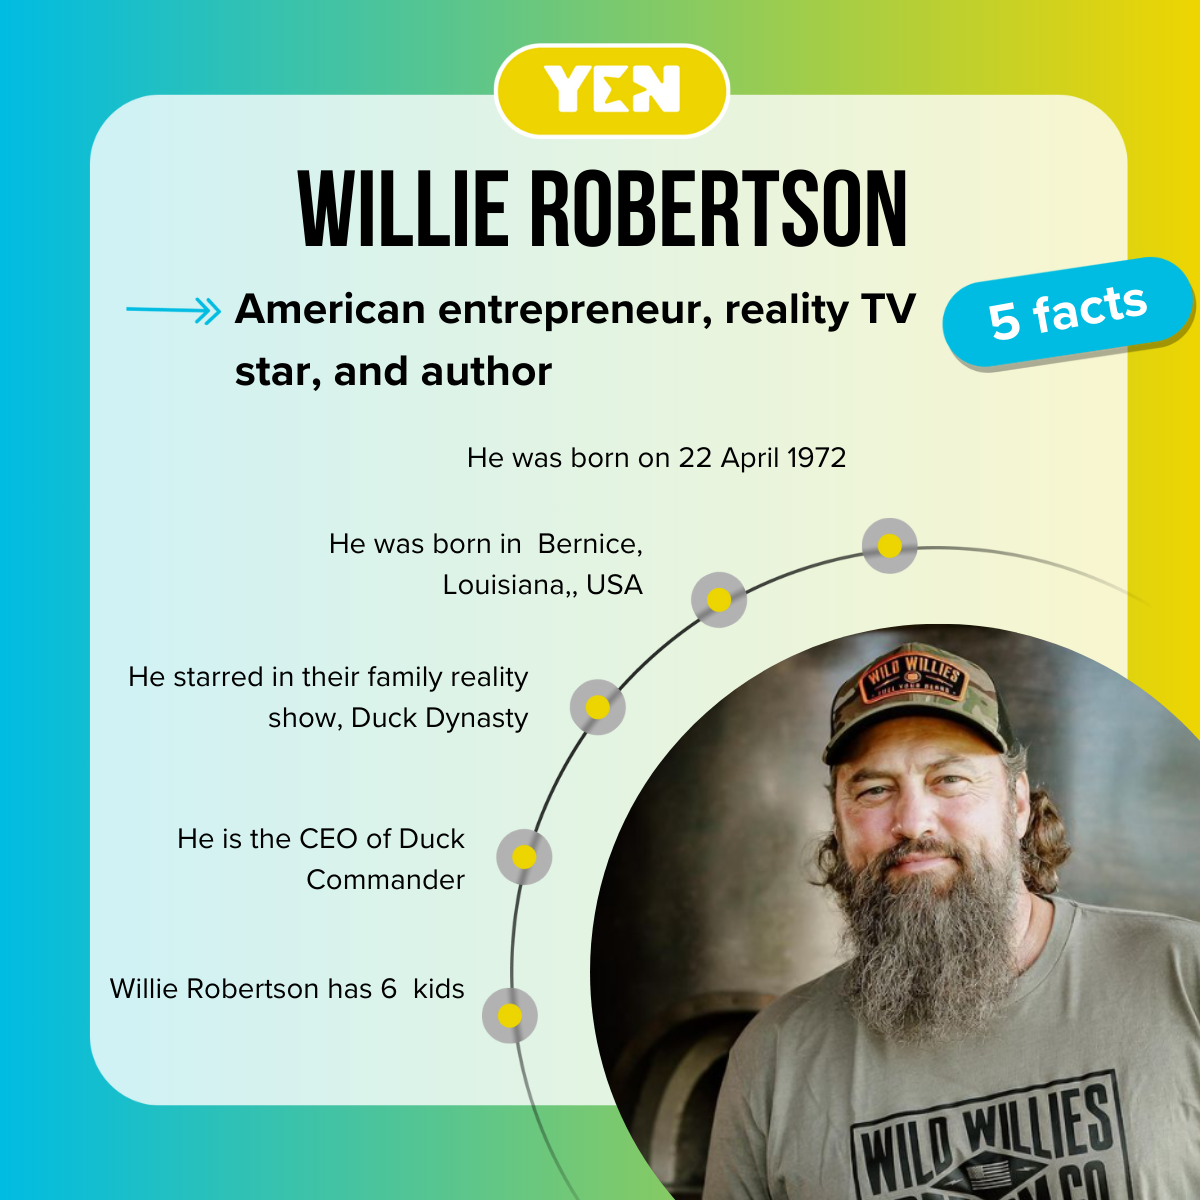 Facts about Willie Robertson